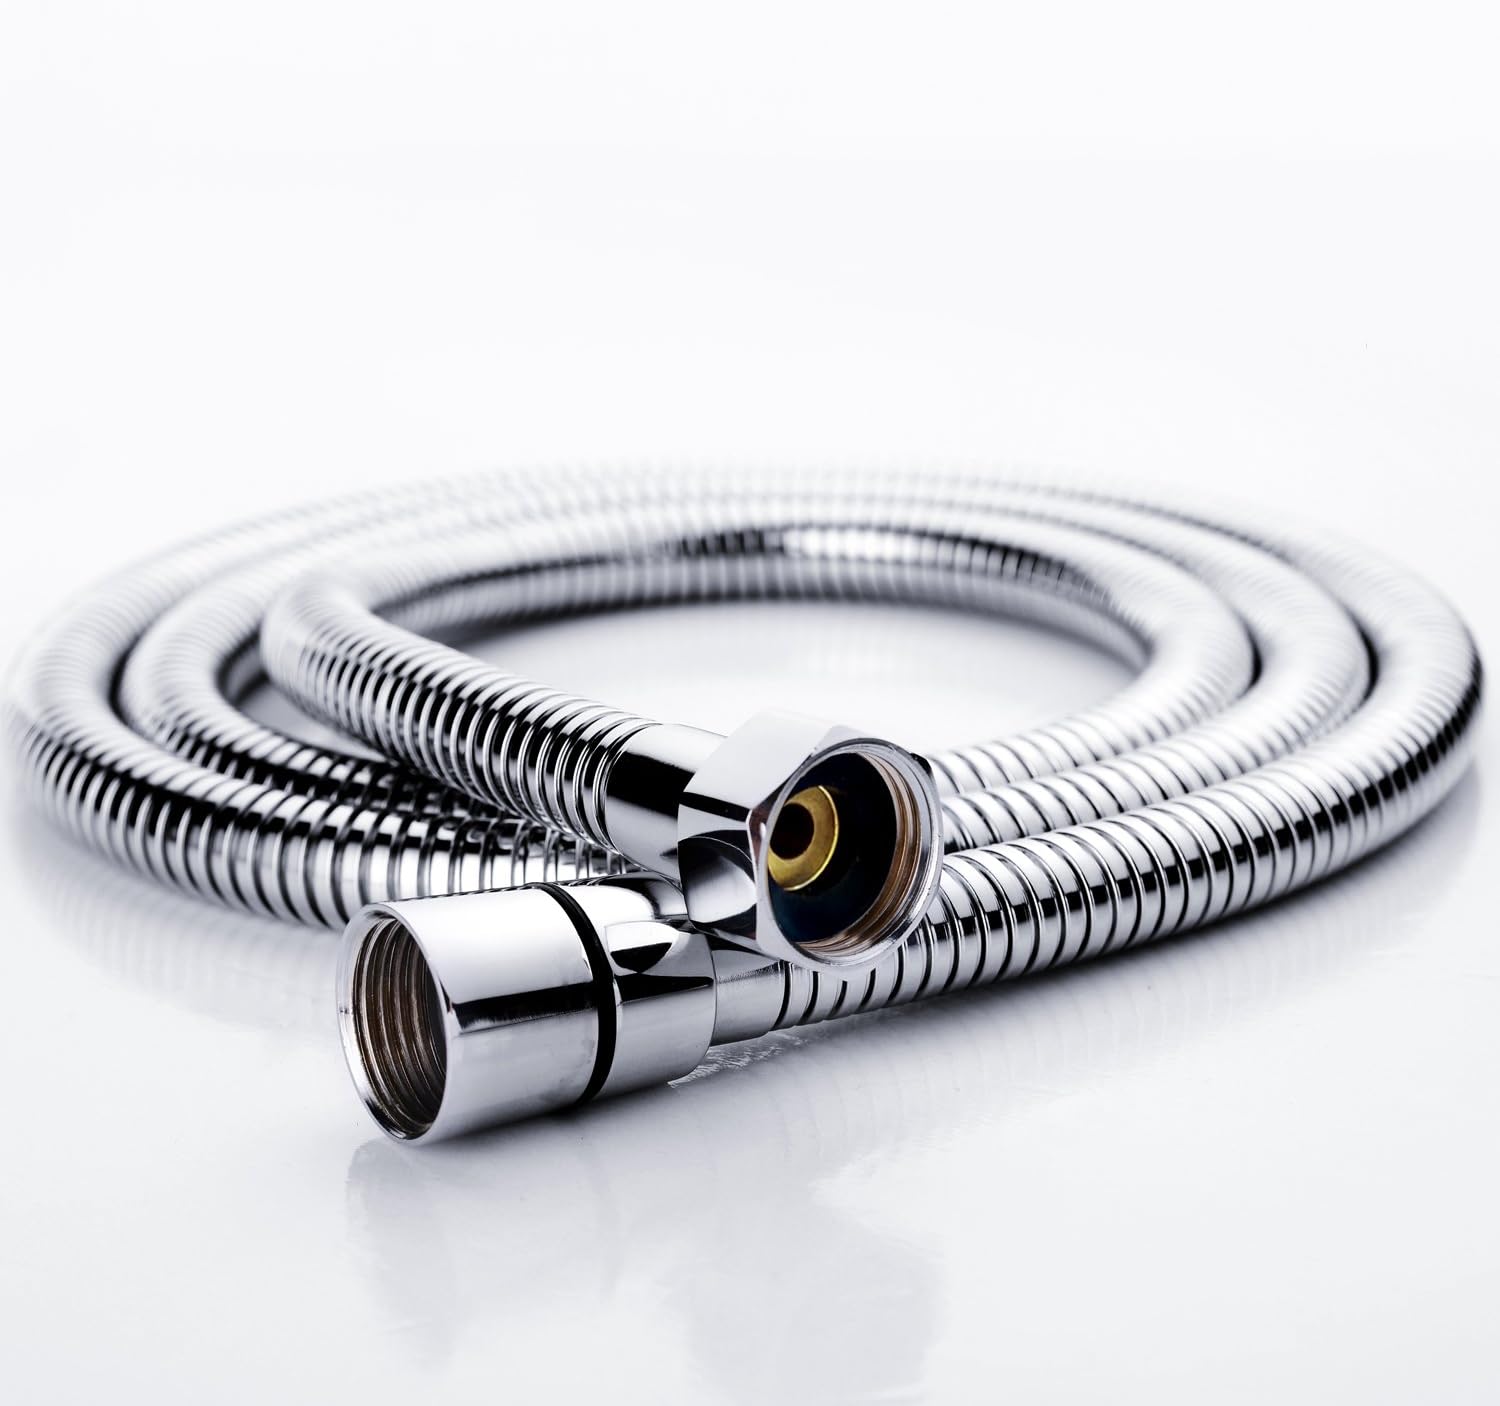 SR SUN RISE Flexible 304 Stainless Steel Replacement Shower Hose with Brass Fittings. RV Shower Hose. Explosion-Proof. 1.8 Meters/5.9 Ft/71 Inches. Matte Black